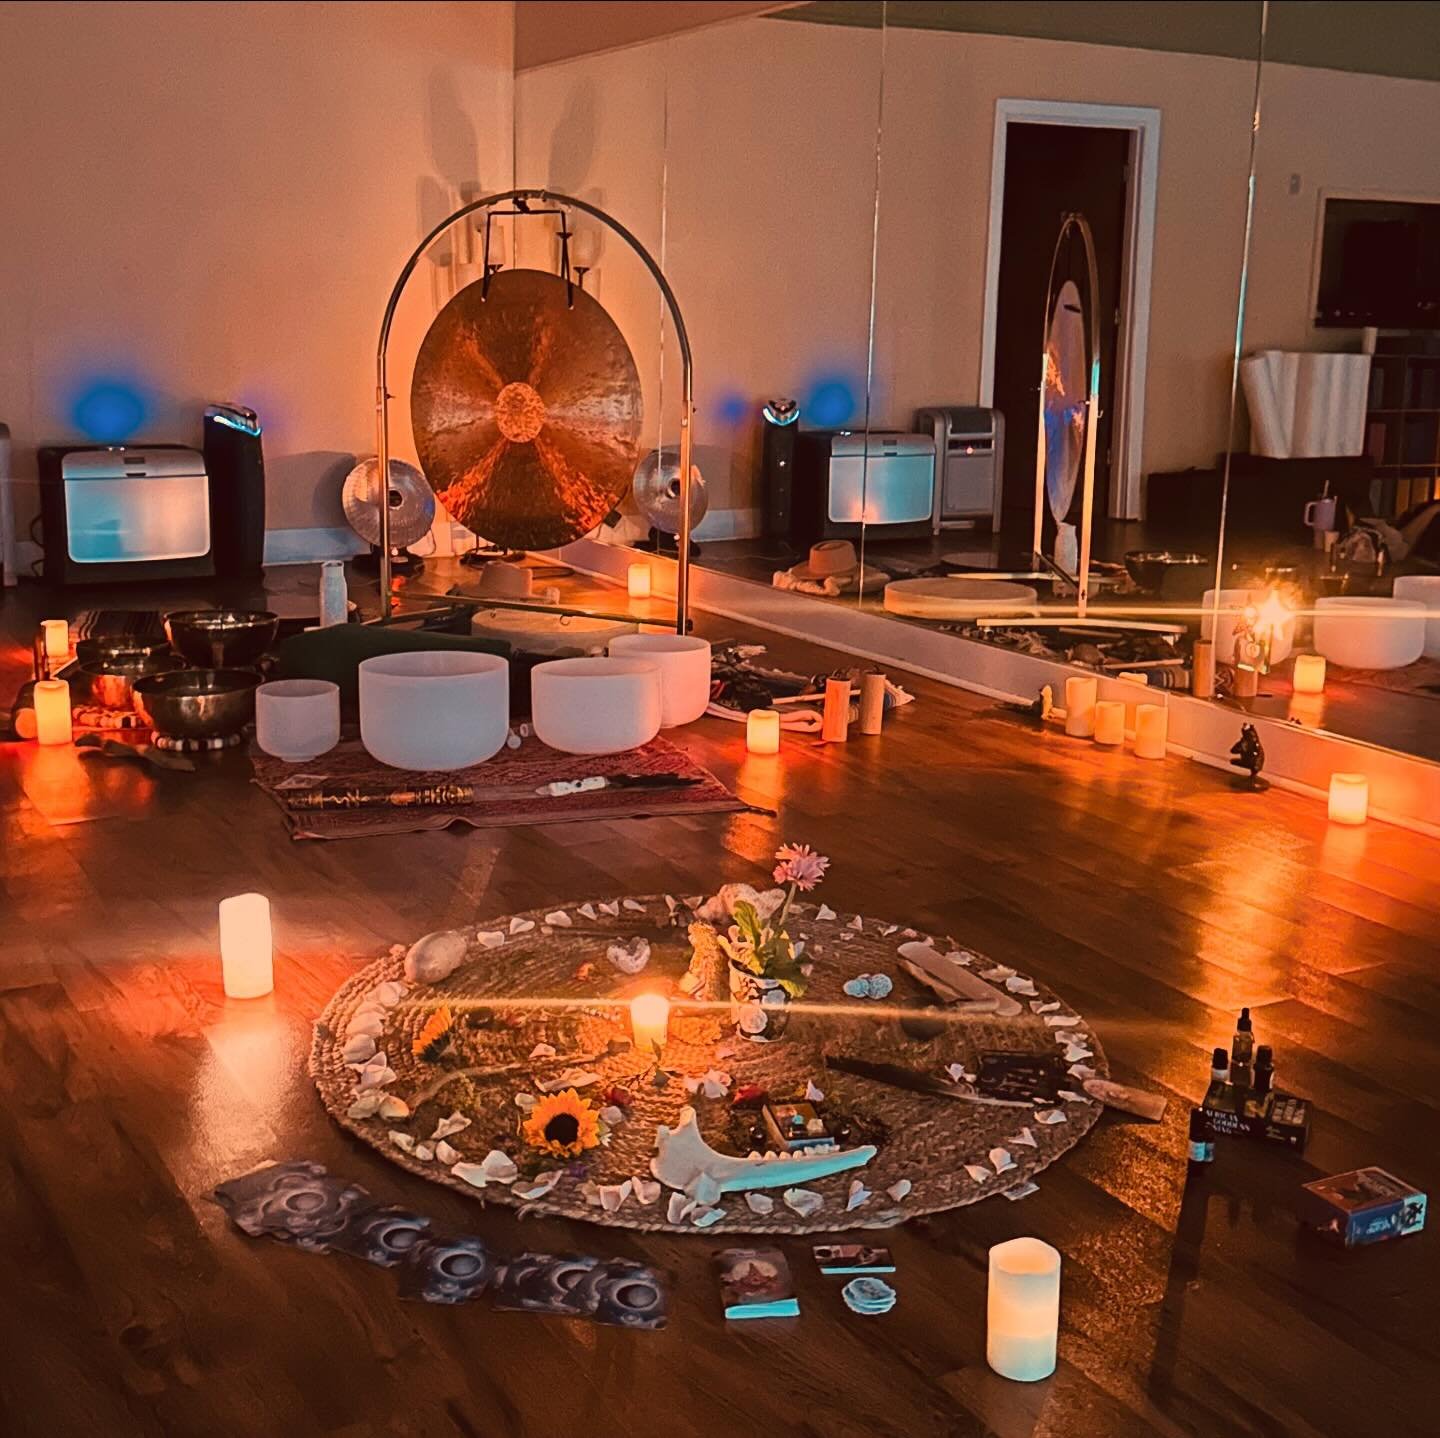 This month&rsquo;s ceremony we had the honor of having The SOL Sonic in ceremony offering sound during our meditation. Thank you @happyworldphoto for your presence and for sharing your sound medicine. 

Thank you to the sweet souls that heard the cal